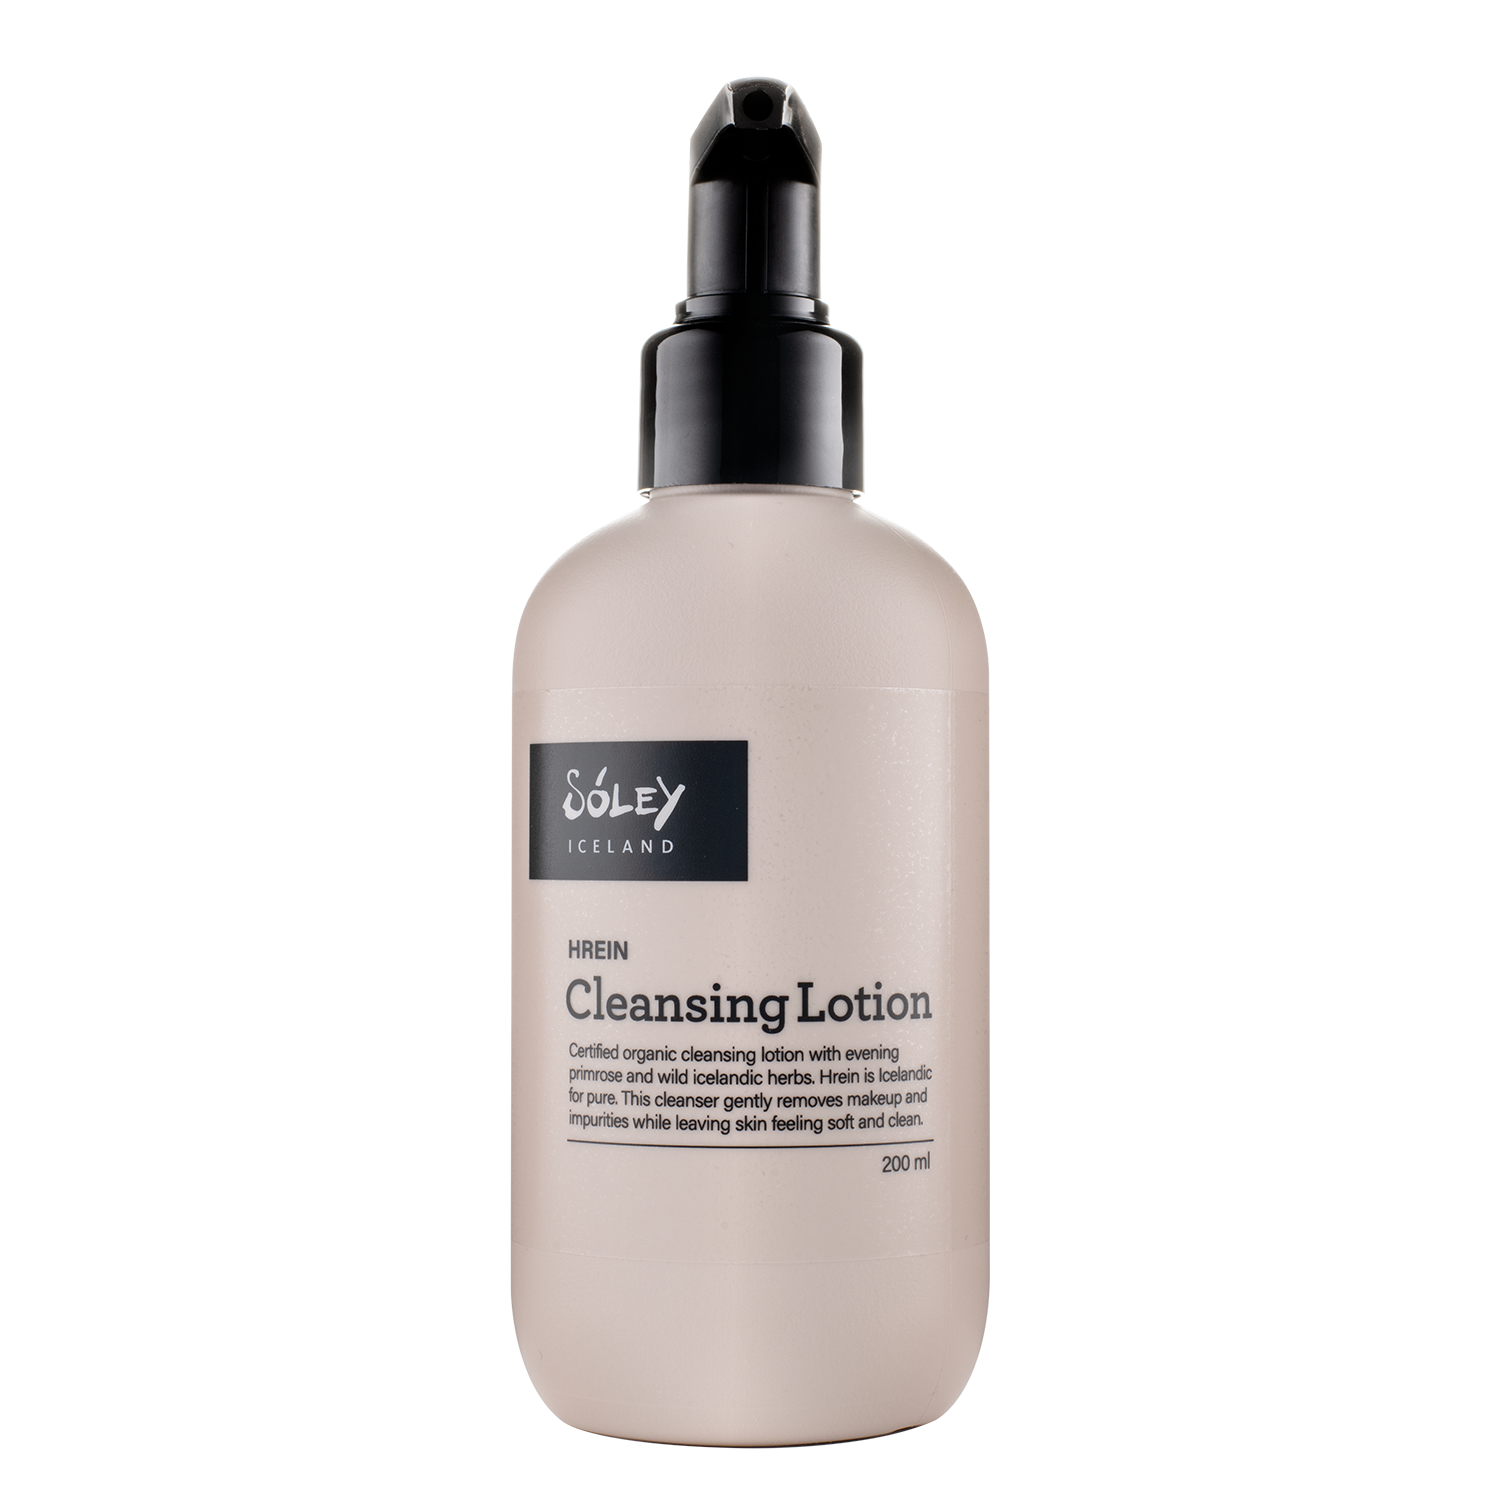 Hrein Cleansing Lotion